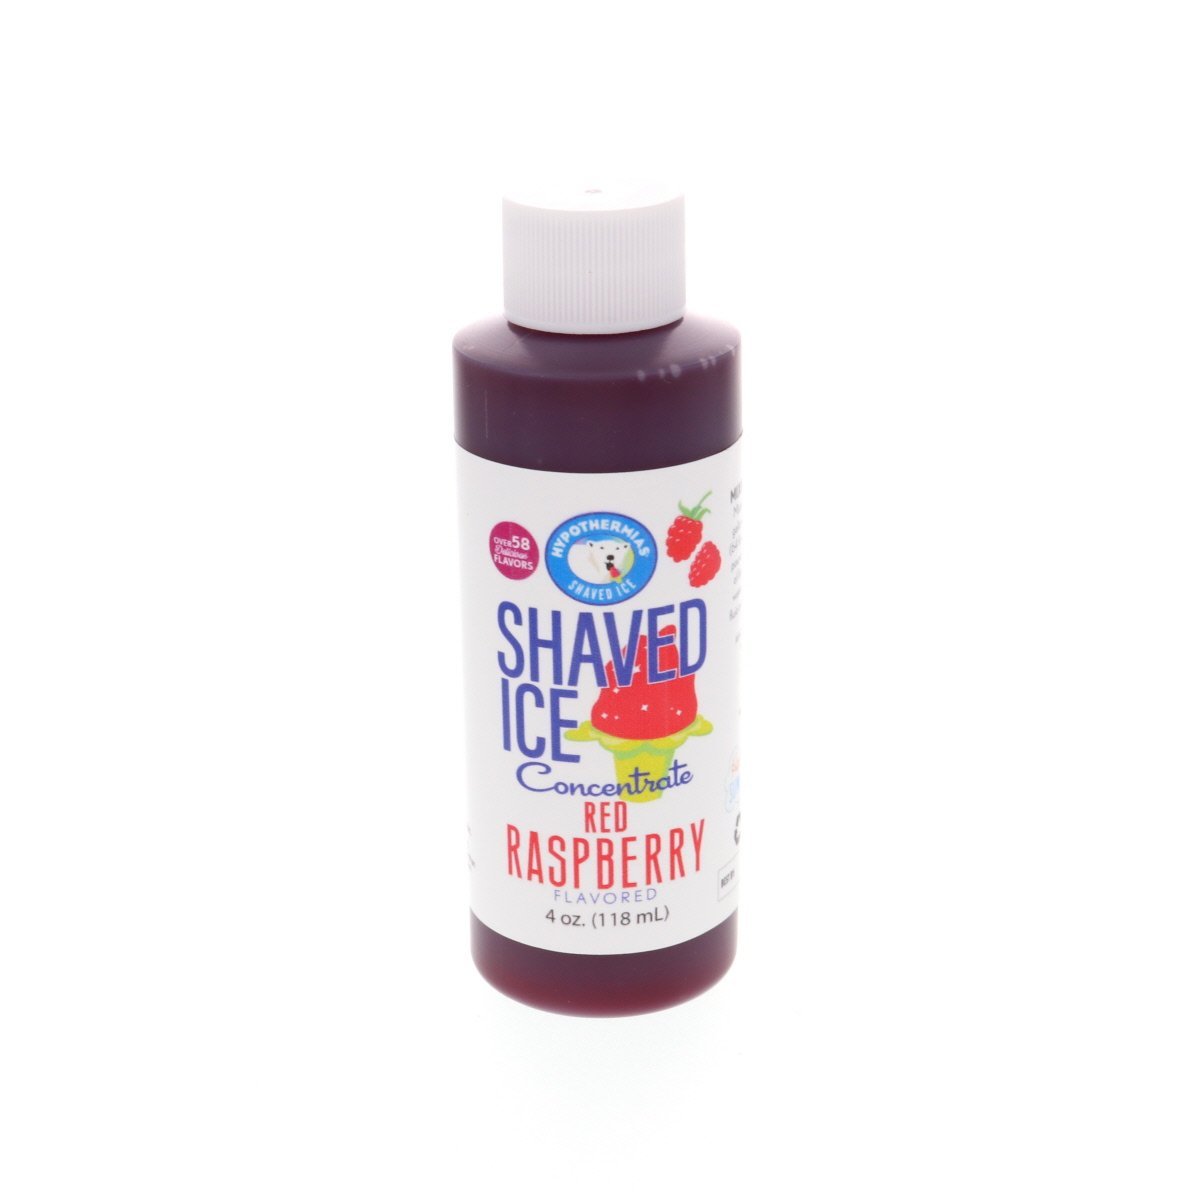 Hypothermias red raspberry shaved ice or snow cone flavor syrup concentrate 4 Fl Oz.